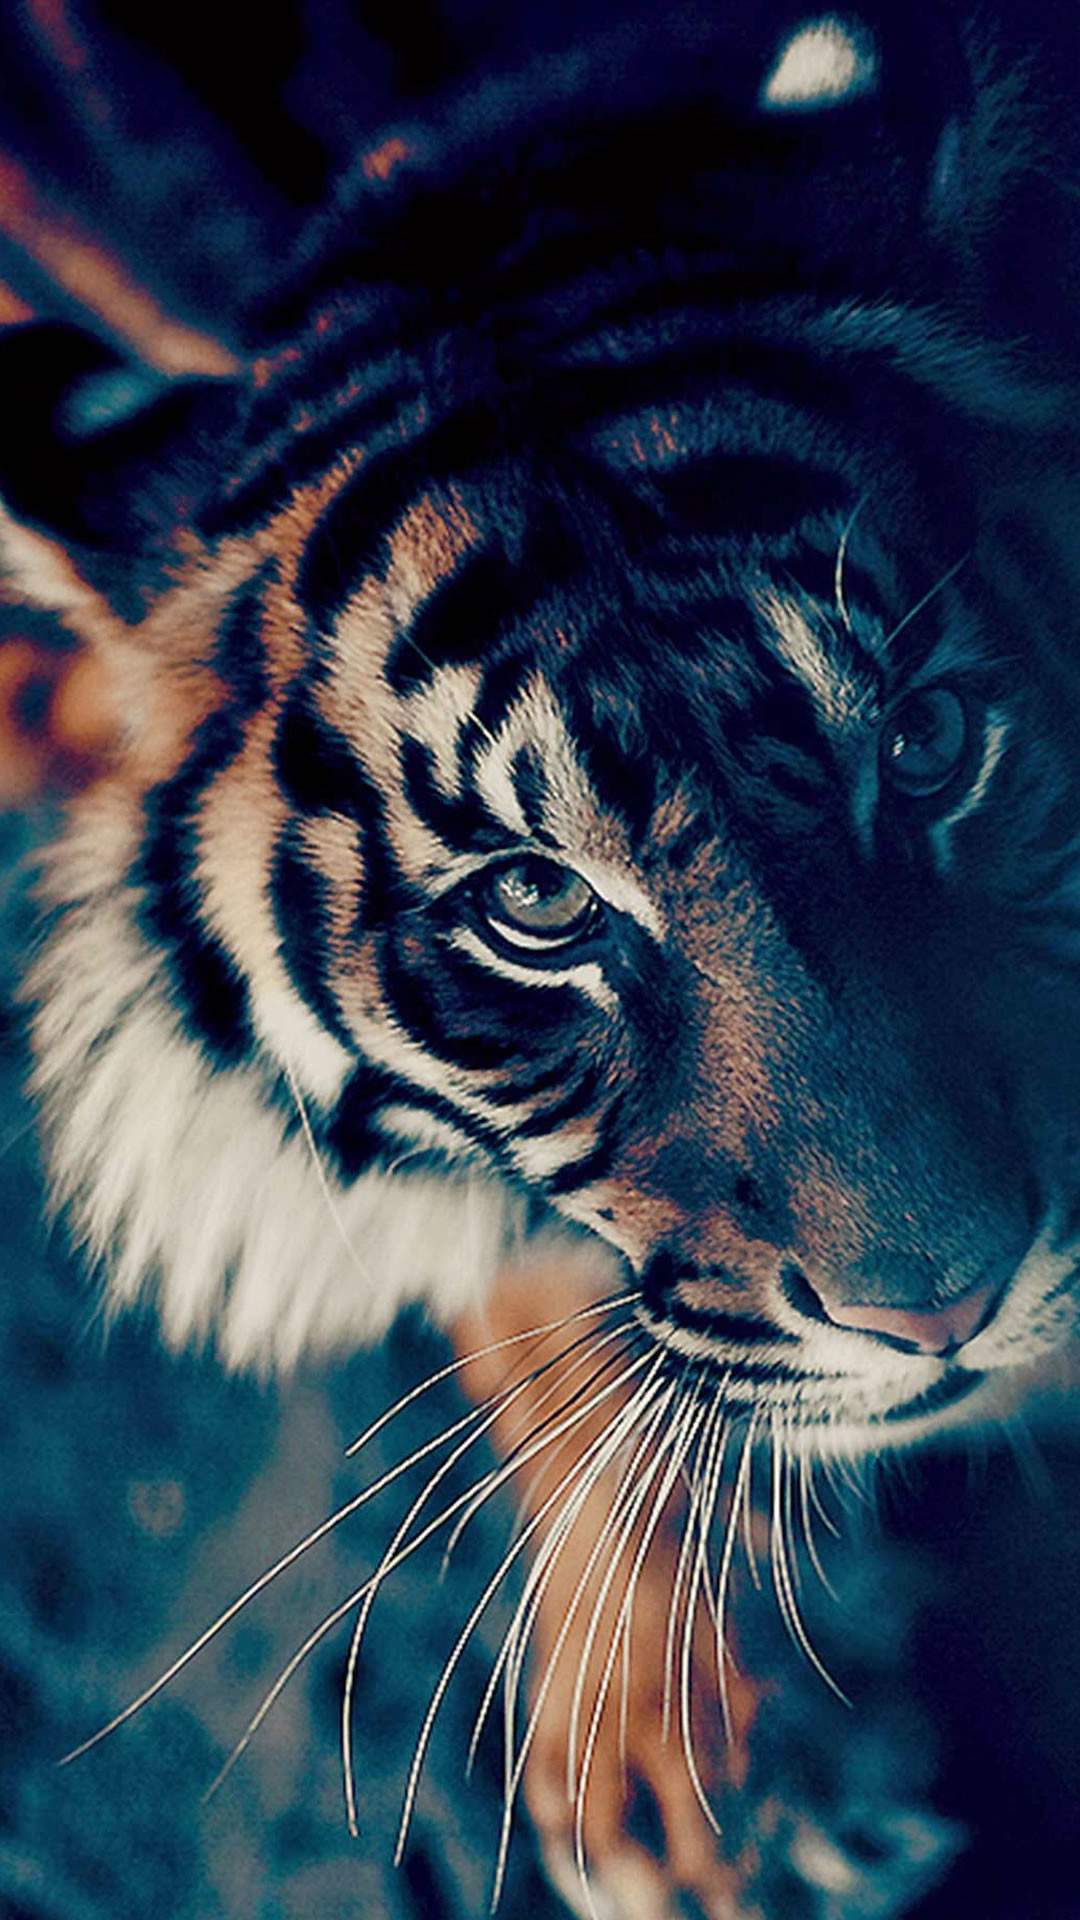 1080x1920 Best 25+ Tiger wallpaper ideas on Pinterest | Tiger pictures, Tigers in the  wild and Tigers